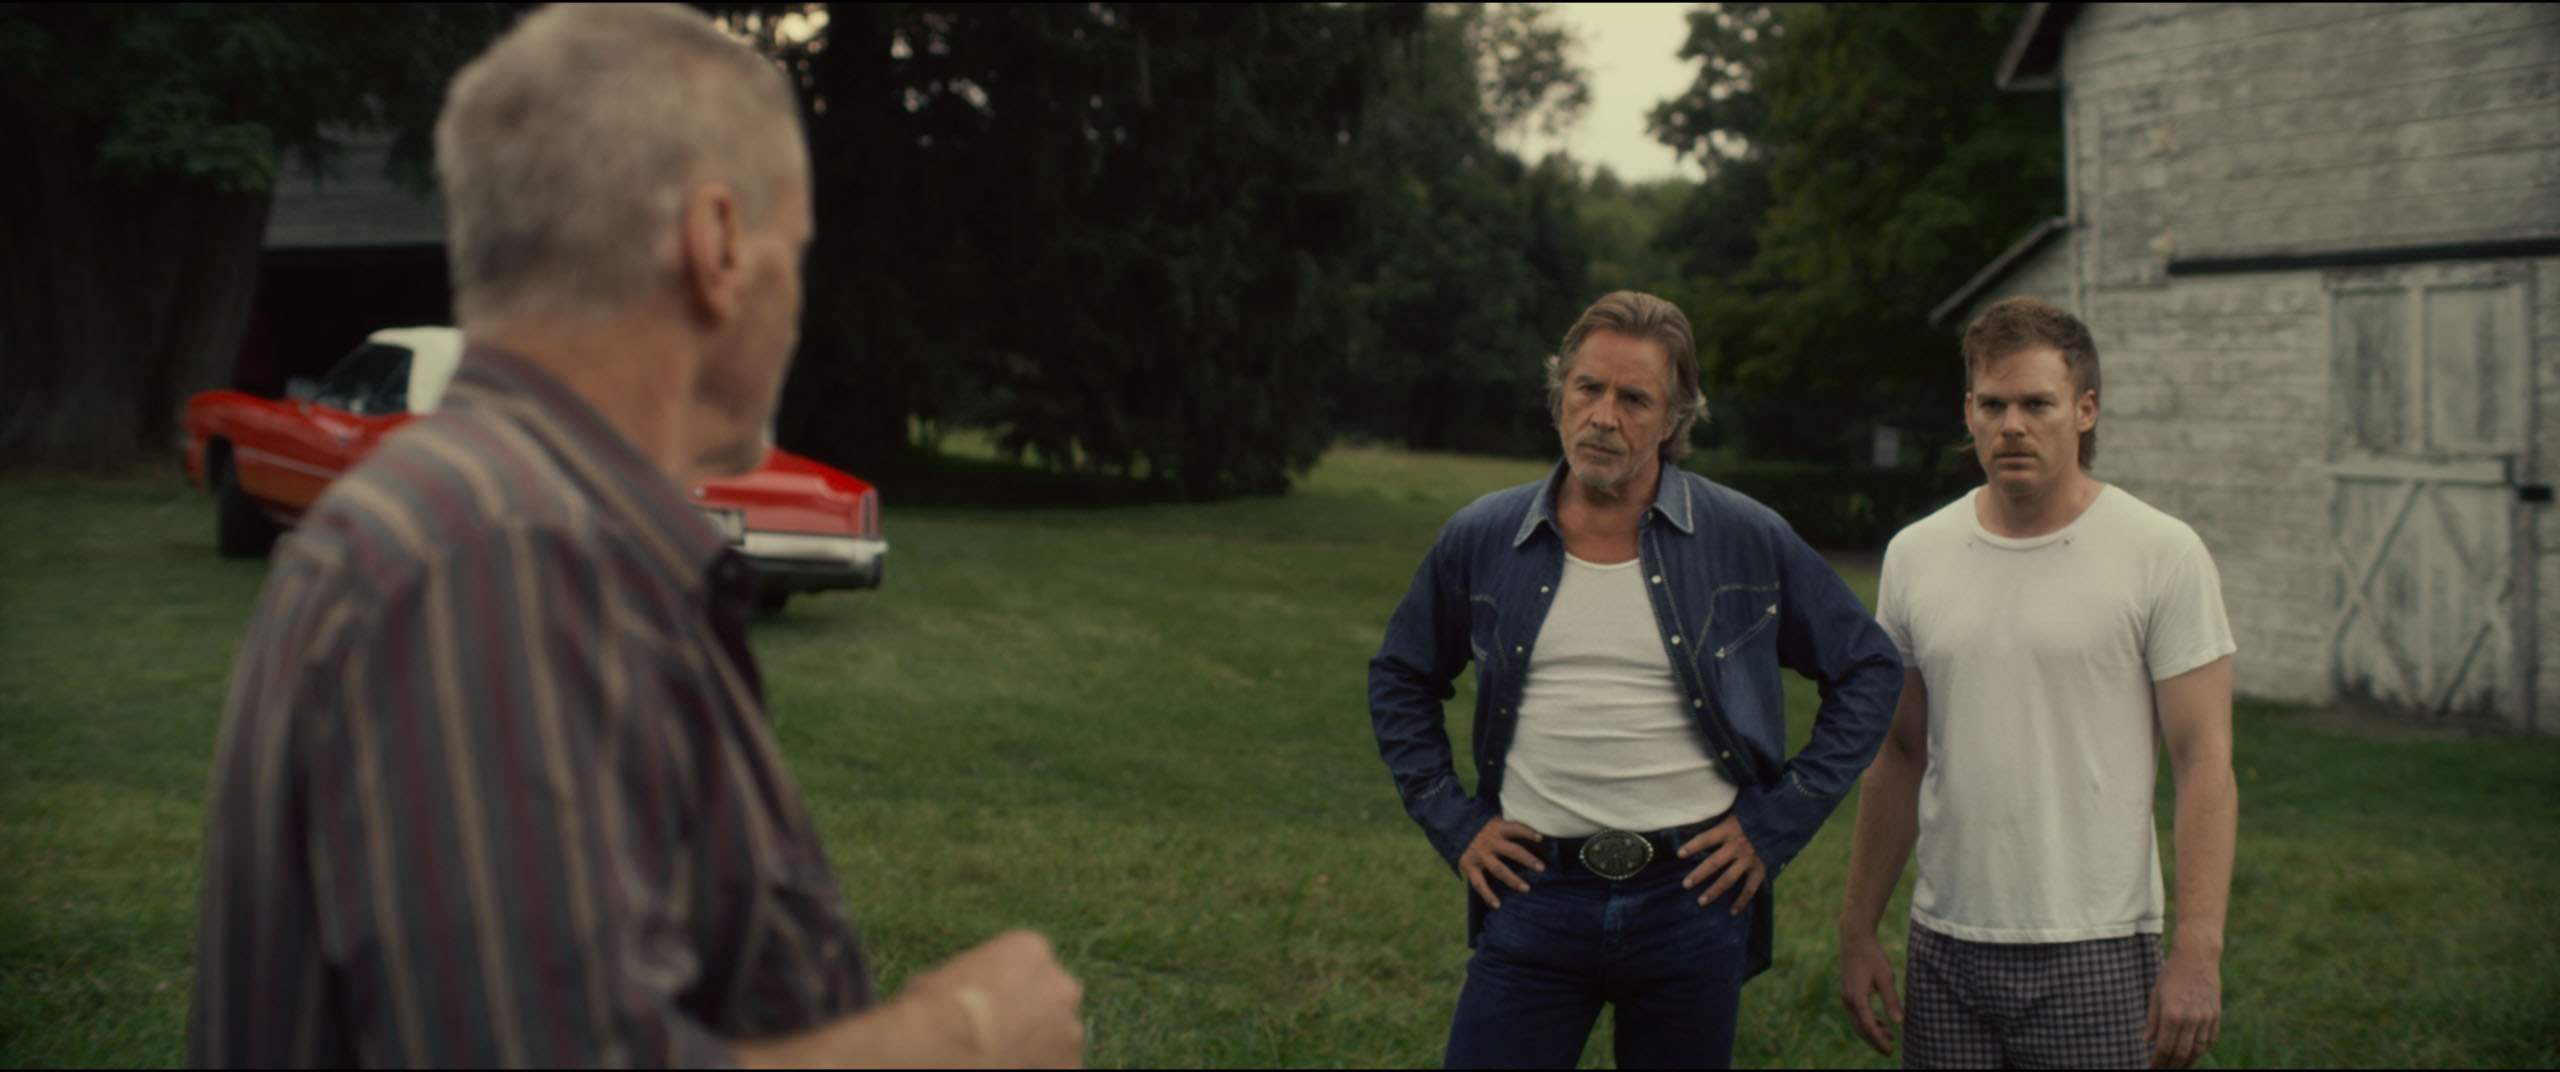 Sam Shepard, Don Johnson and Michael C. Hall in Cold In July